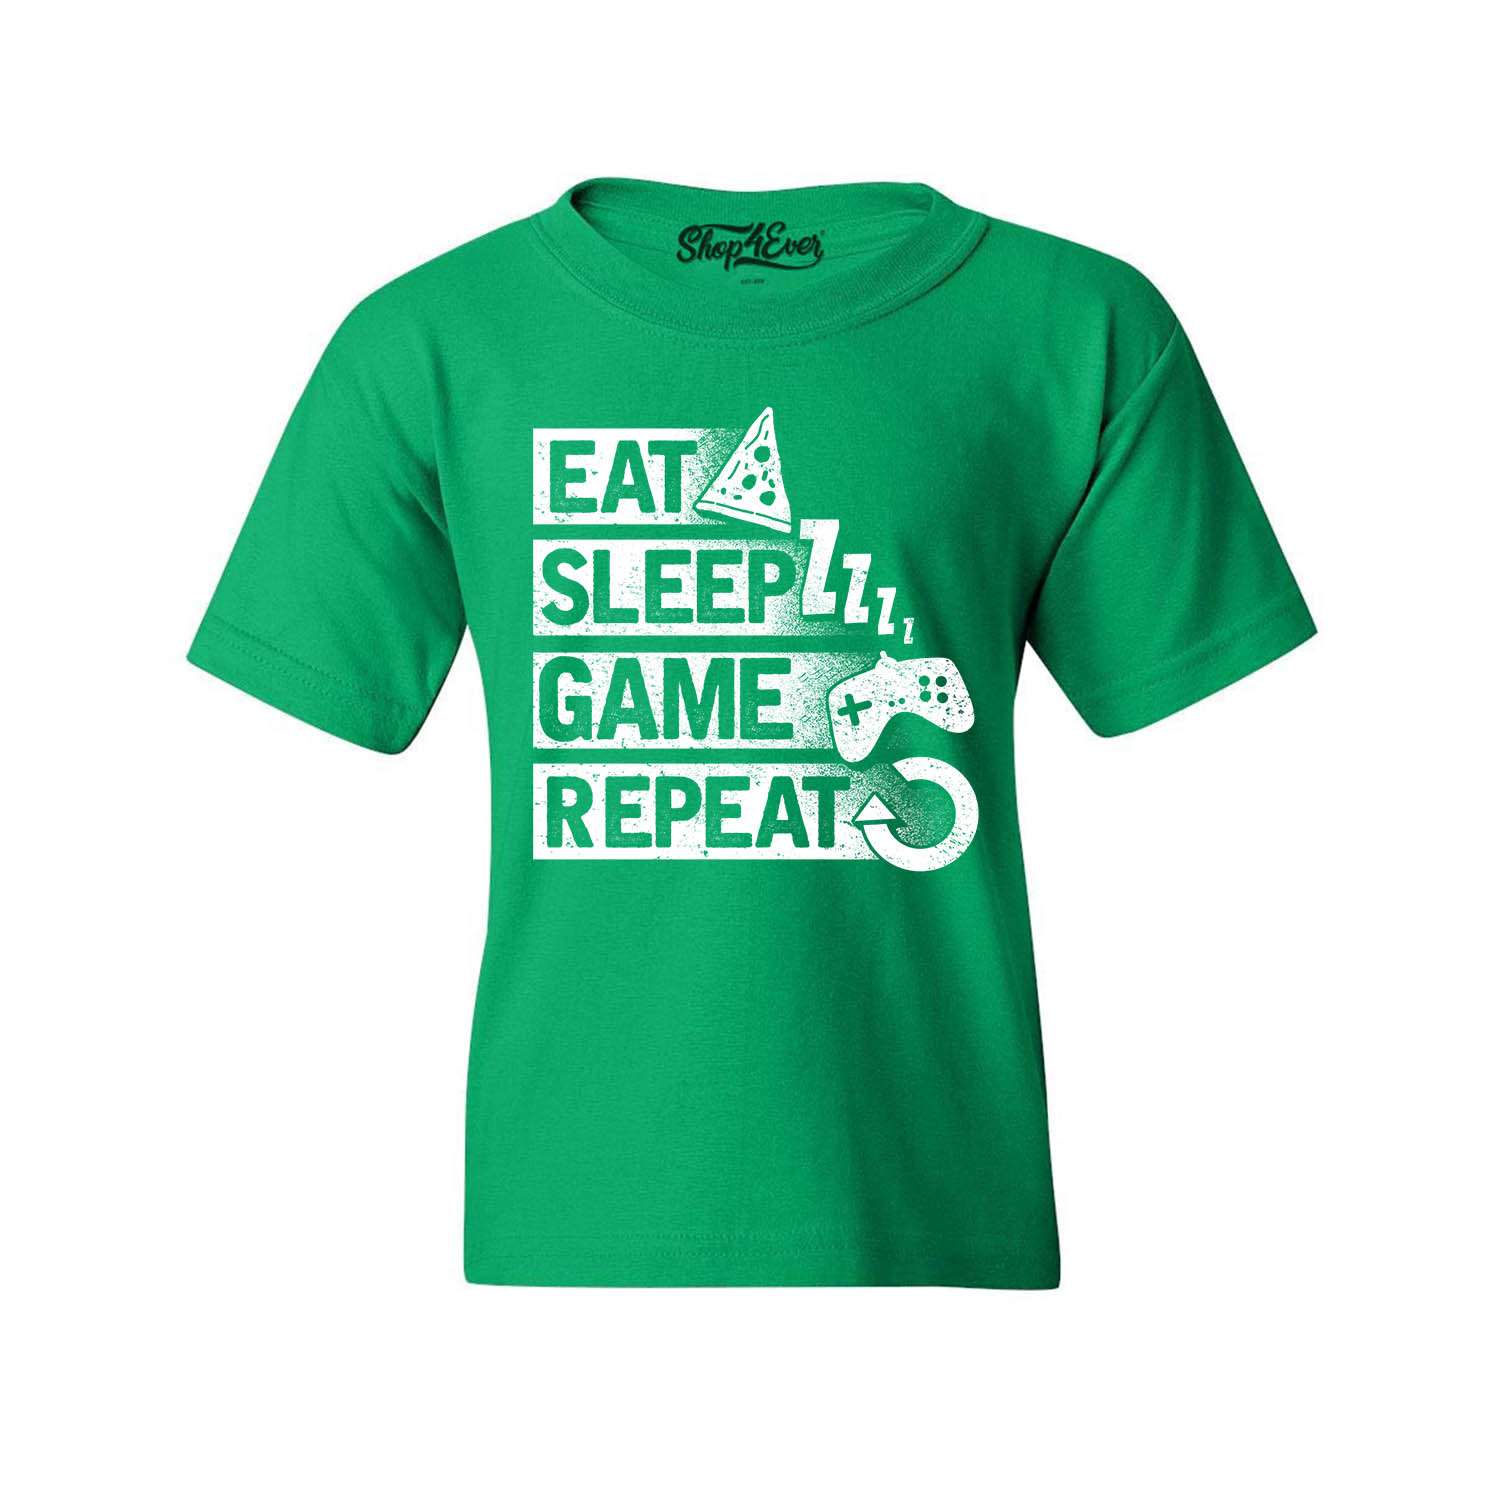 boy Eat Gift for Gamer Gaming T Shirt Sloth Gaming Tee Repeat Sloth With Headphones Tshirt For him Game her son, Sleep